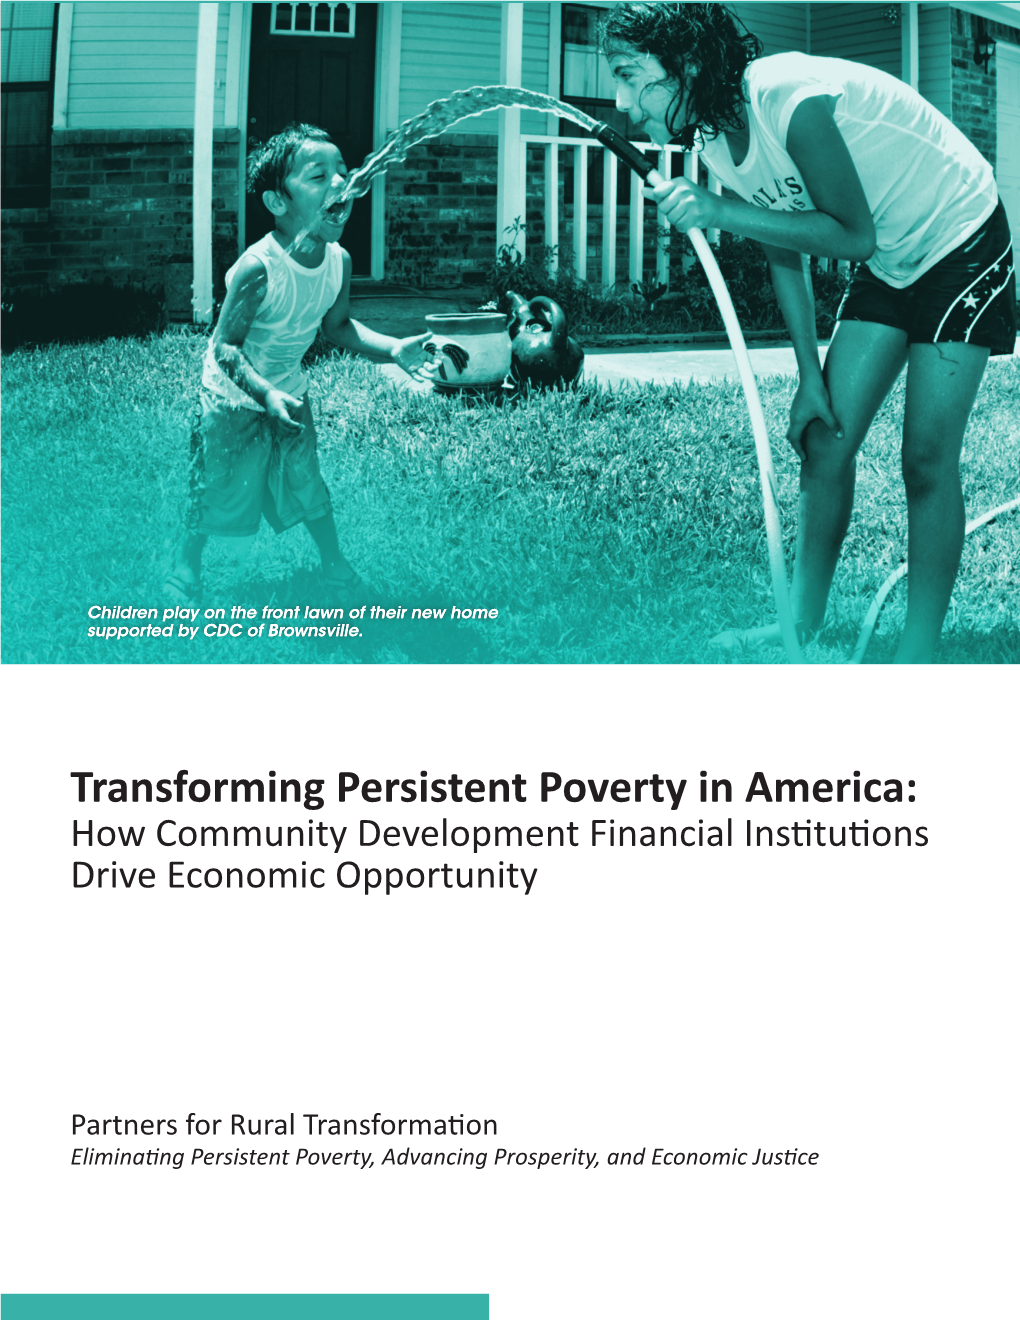 Transforming Persistent Poverty in America: How Community Development Financial Institutions Drive Economic Opportunity